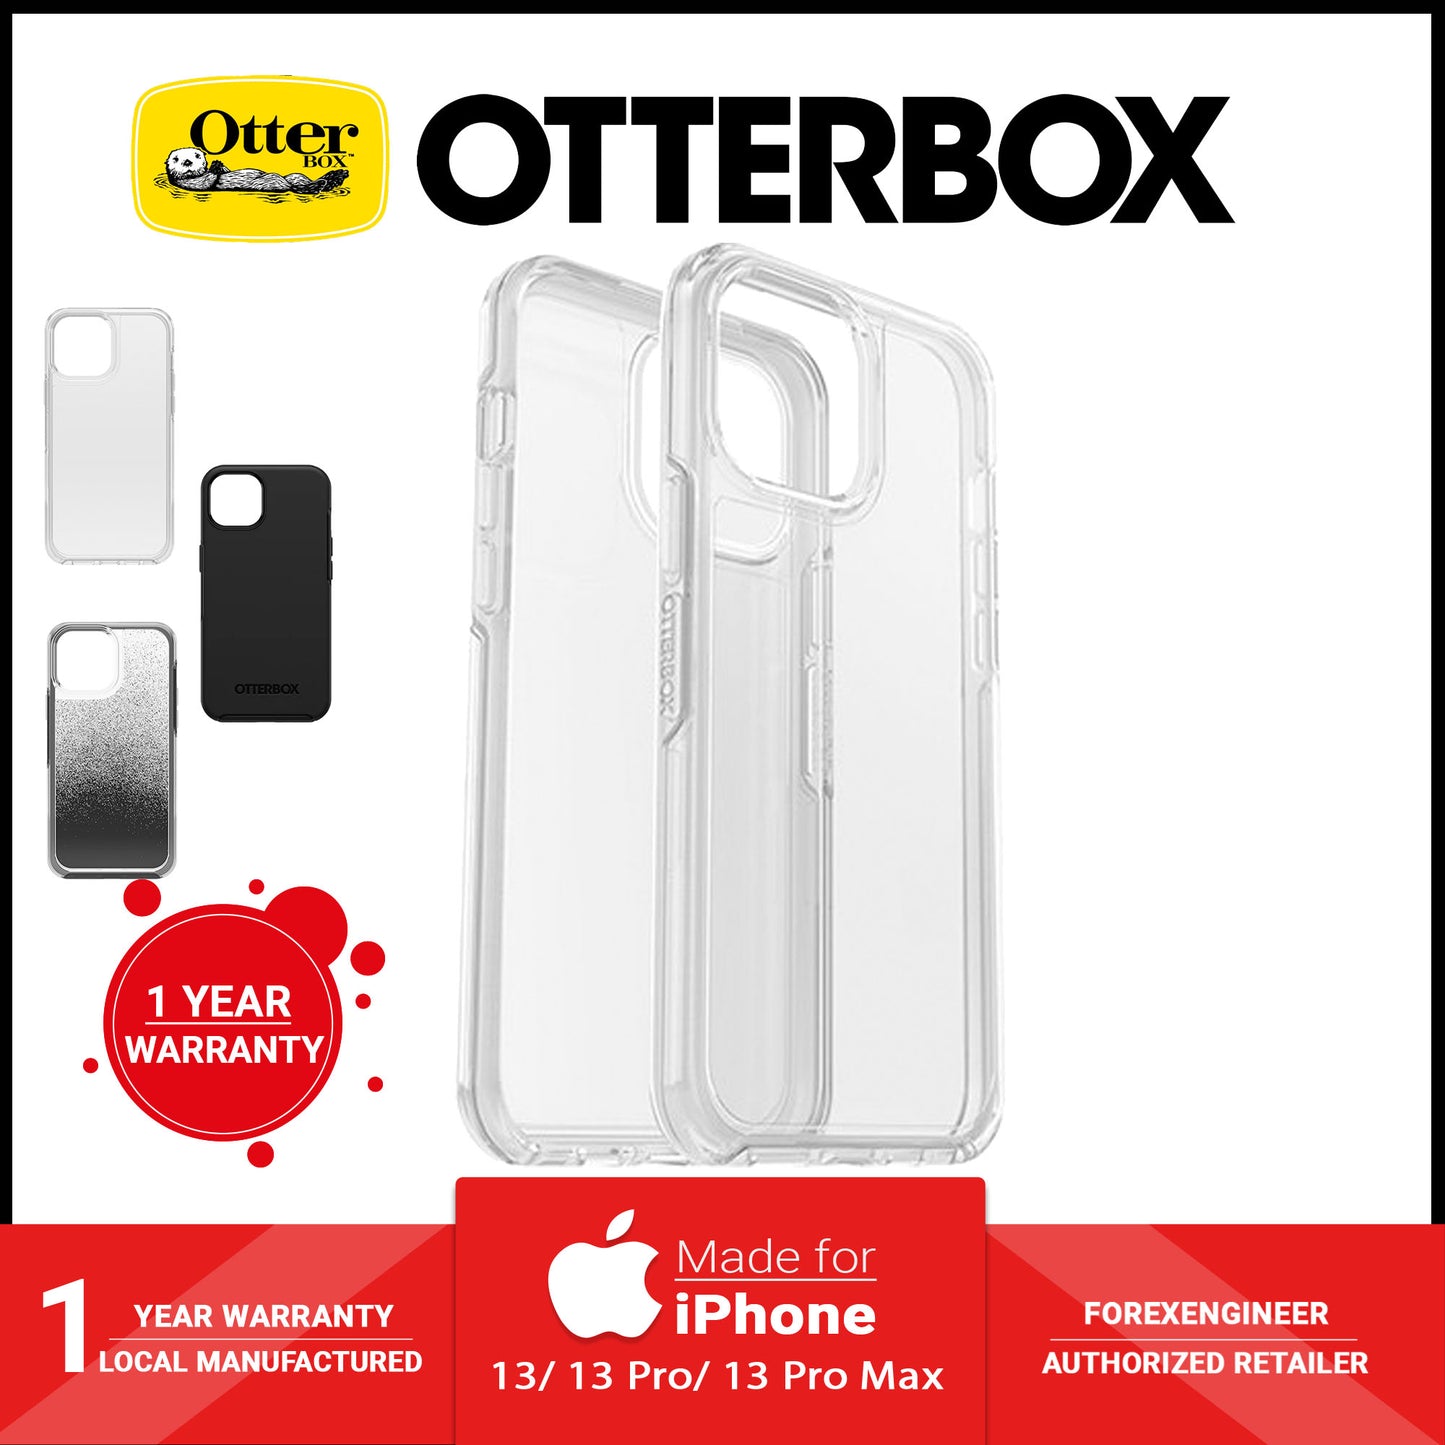 Otterbox Symmetry Clear for iPhone 13 6.1" 5G - Antimicrobial Case - Clear (Barcode: 840104284445 )